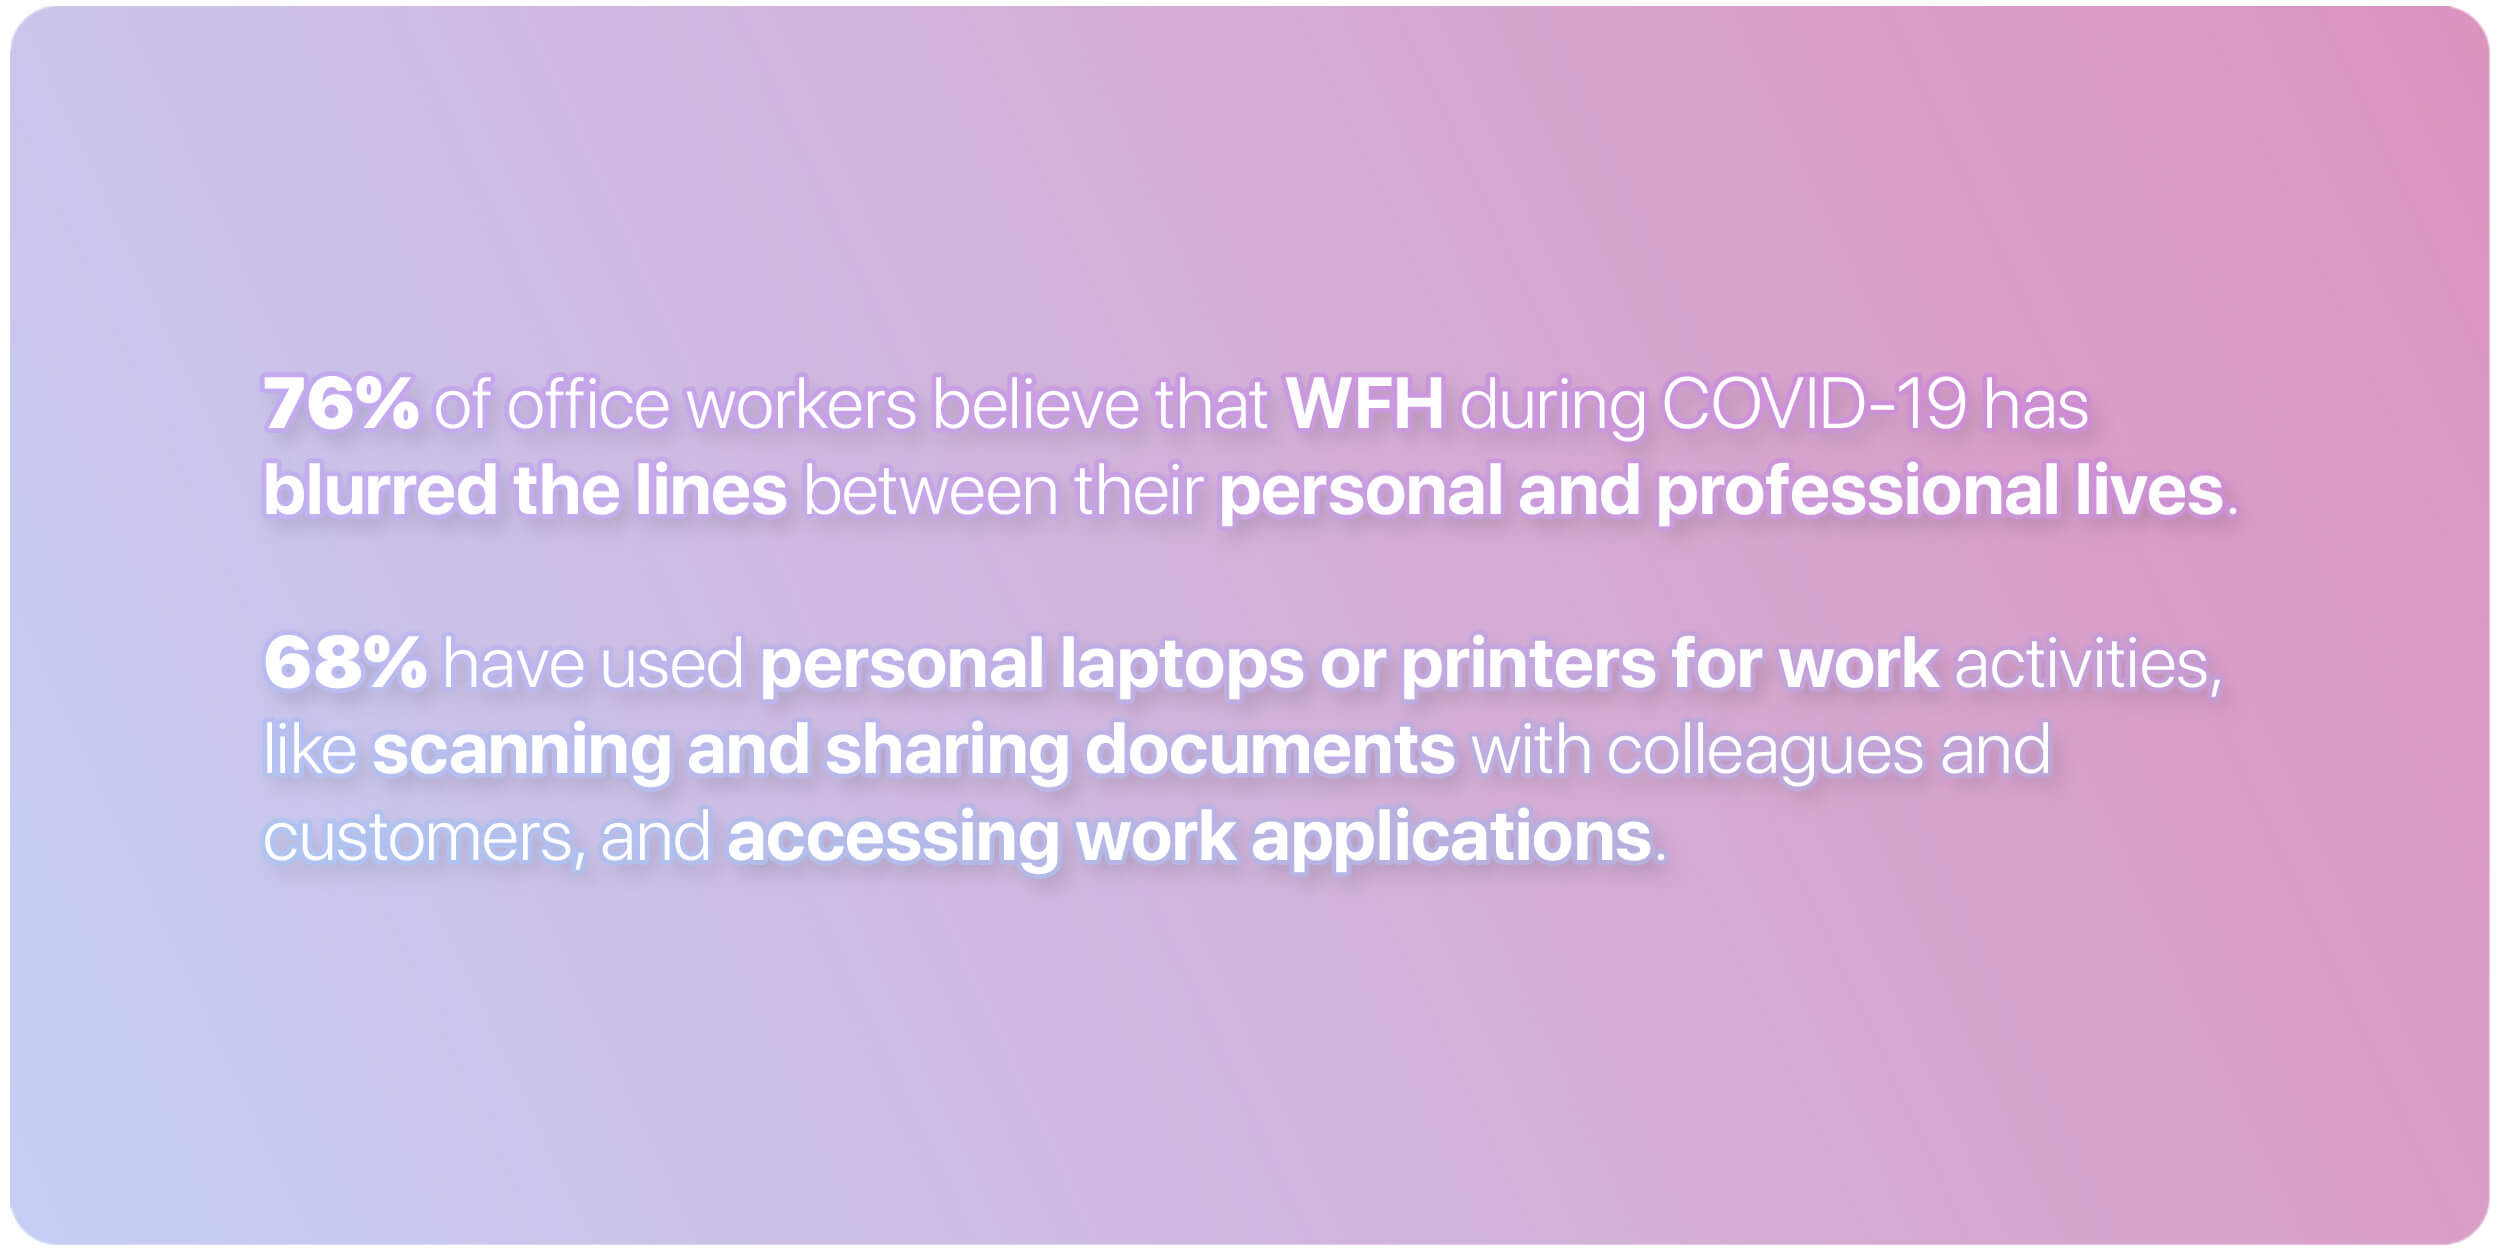 Statistics about office workers from the HP Wolf Security report.